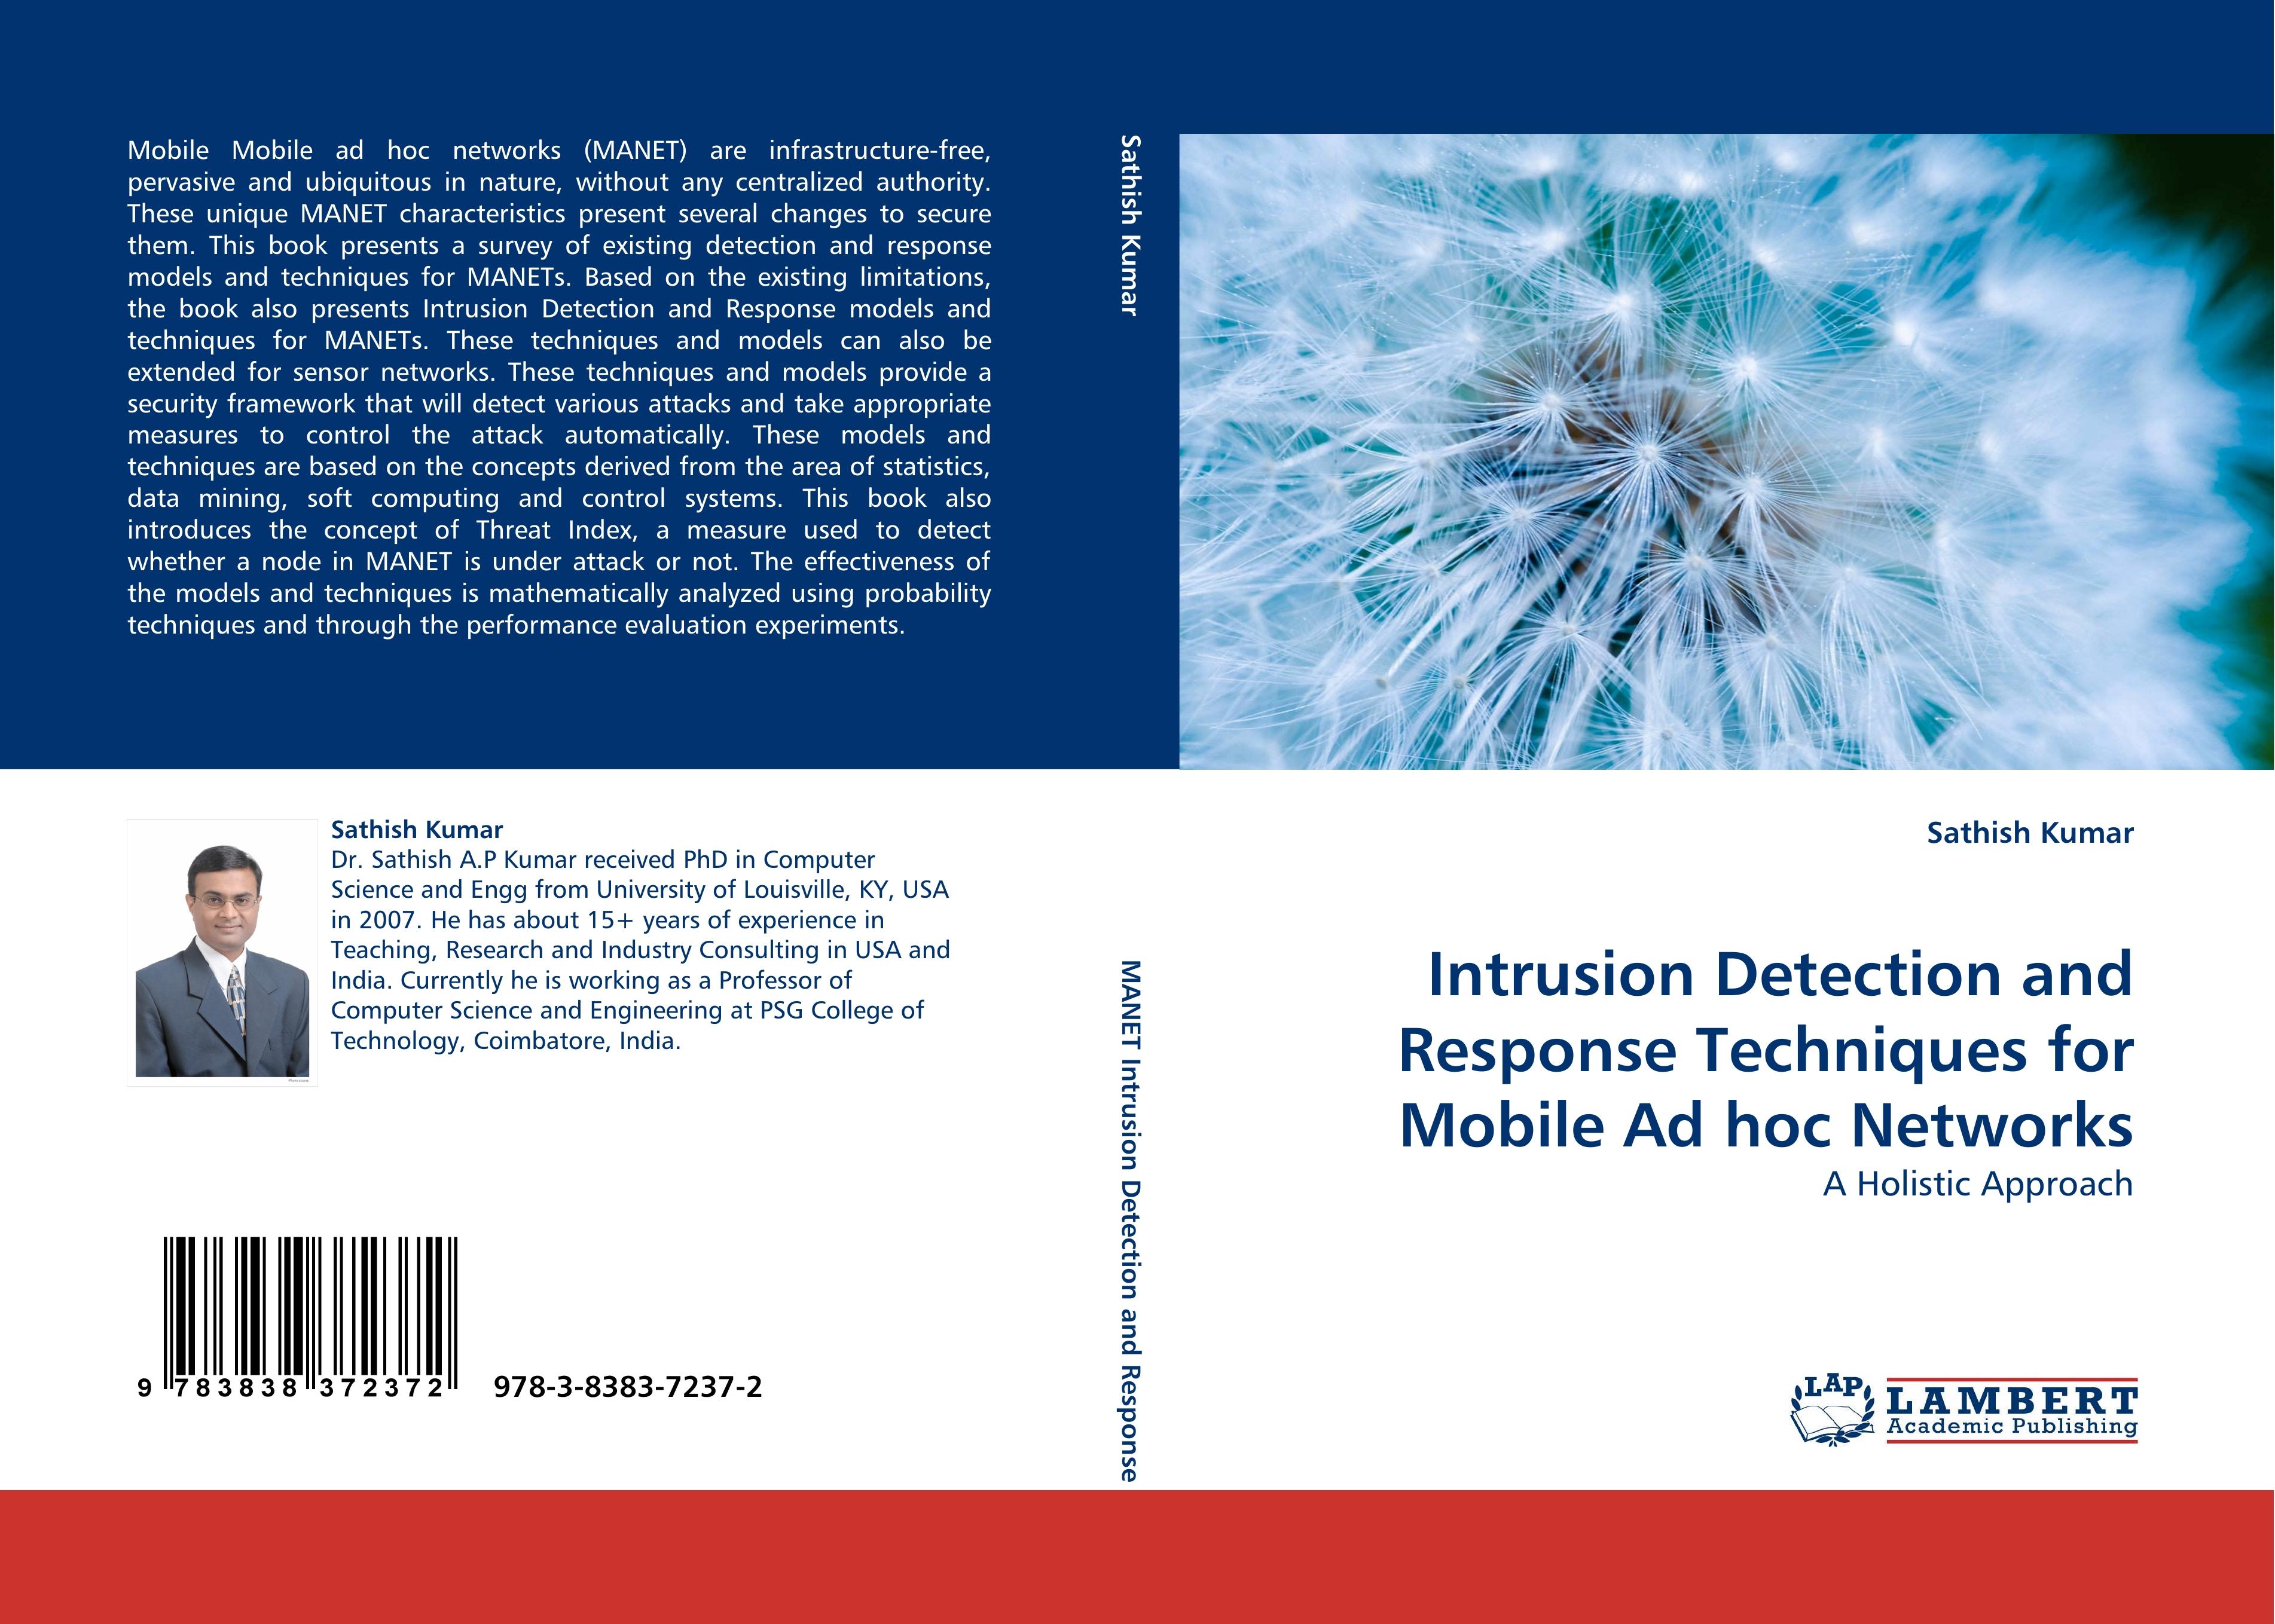 Intrusion Detection and Response Techniques for Mobile Ad hoc Networks / A Holistic Approach / Sathish Kumar / Taschenbuch / Paperback / 200 S. / Englisch / 2010 / LAP LAMBERT Academic Publishing - Kumar, Sathish